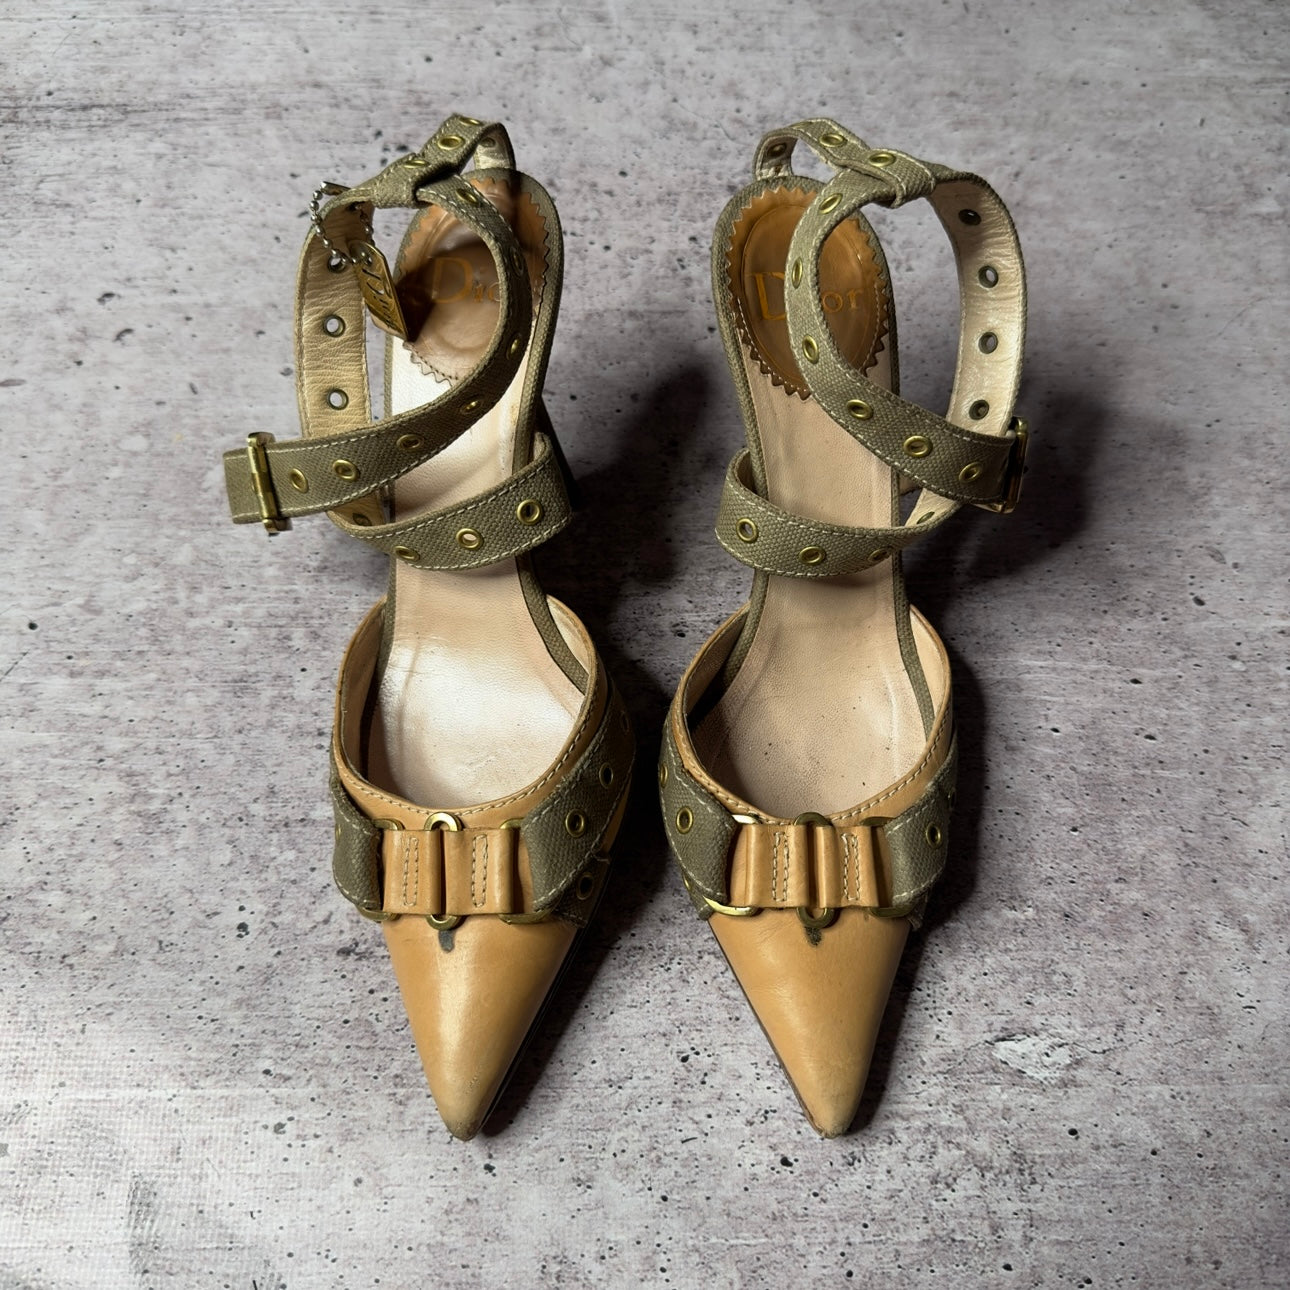 Vintage Christian Dior by Galliano Ankle Wrap Heels